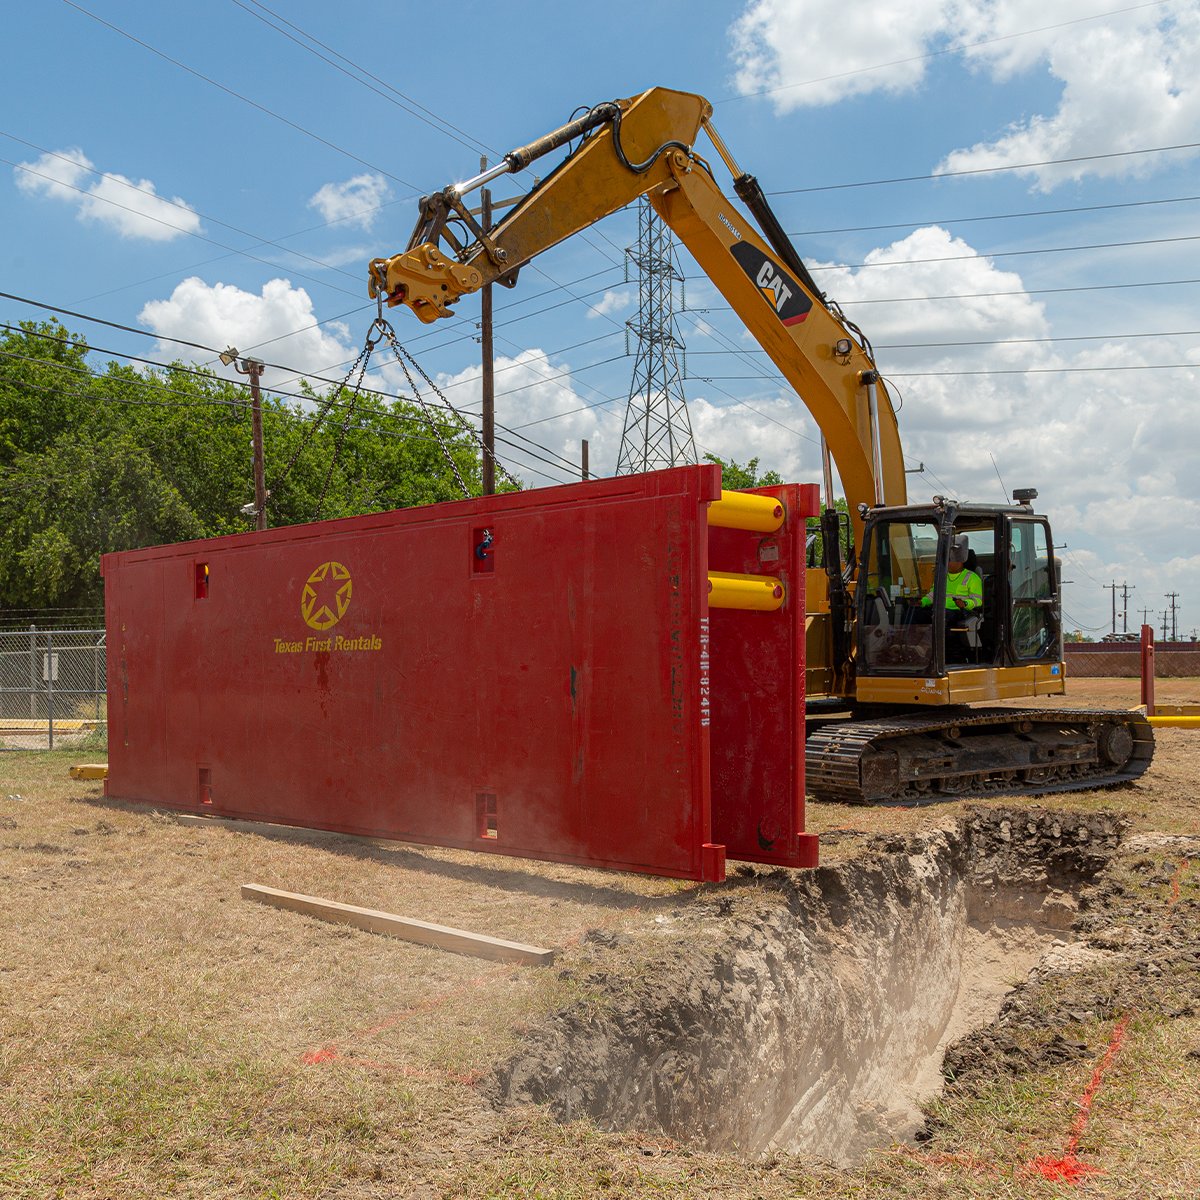 When keeping your people safe in all types of underground projects is a priority, let Texas First be your trusted source for all your trench safety equipment needs. Click here to learn more: bit.ly/42Xciy7

#TexasFirstRentals #TrenchSafetyEquipment